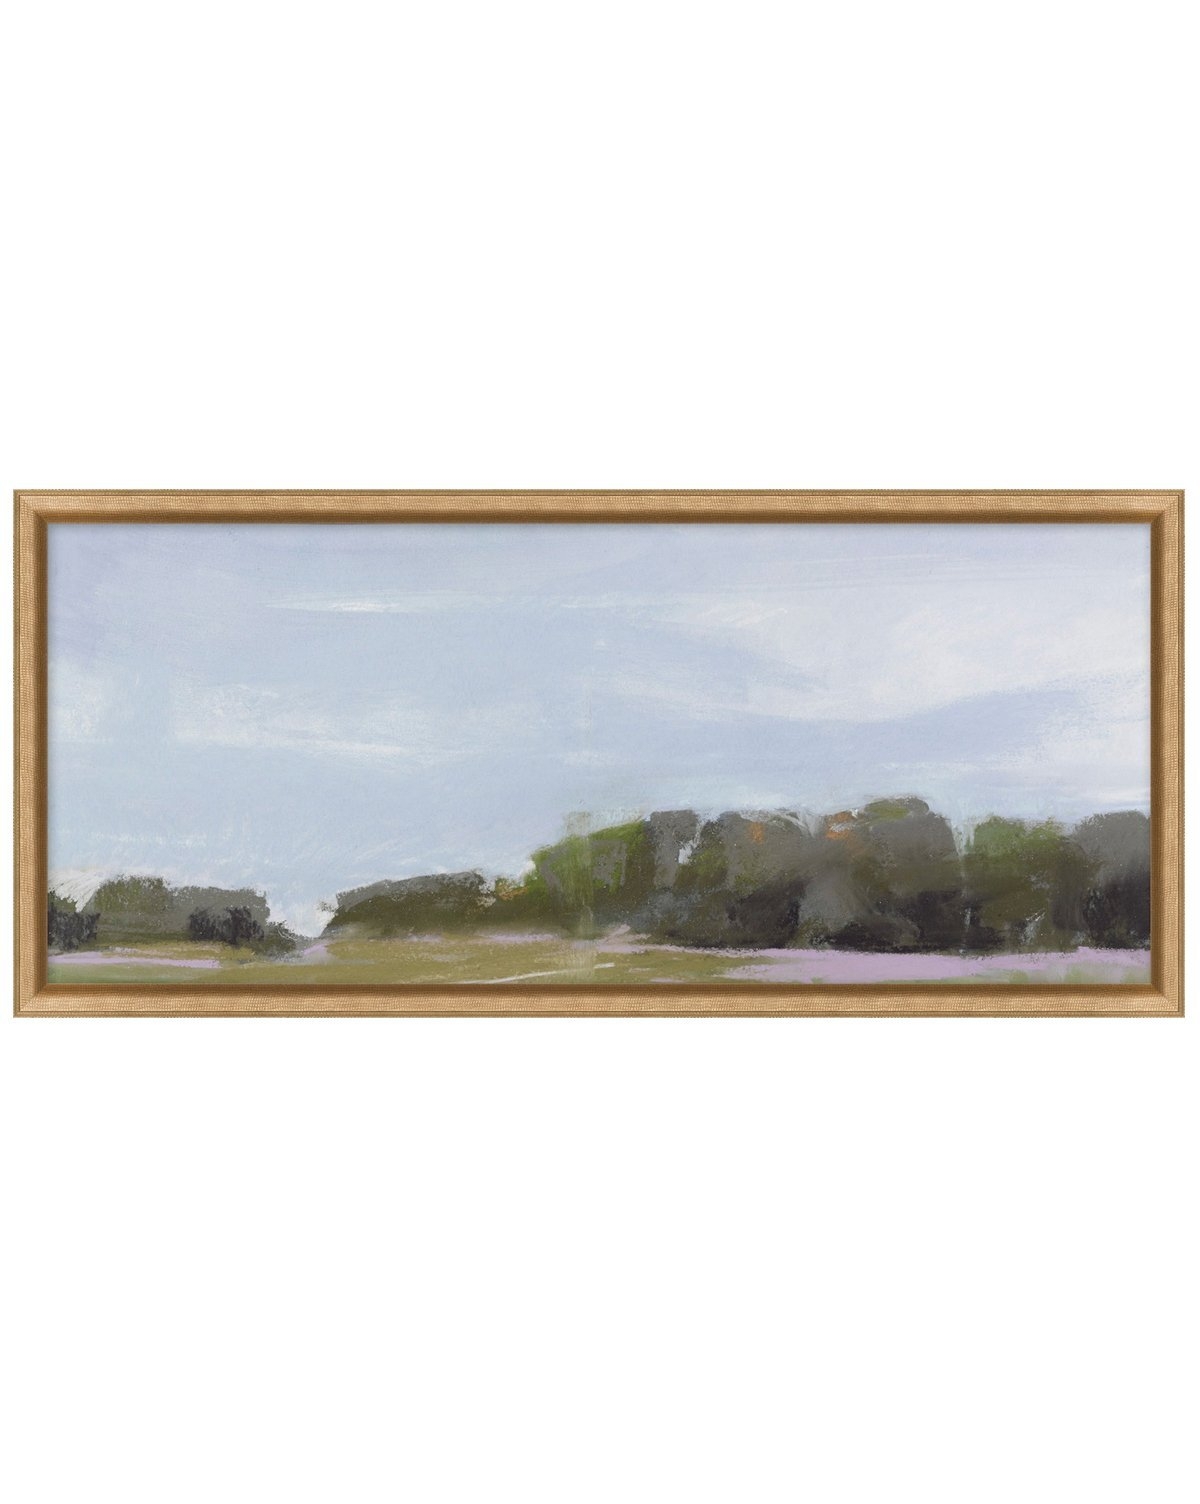 ABSTRACT LANDSCAPE 5 Framed Art - Small - Image 0